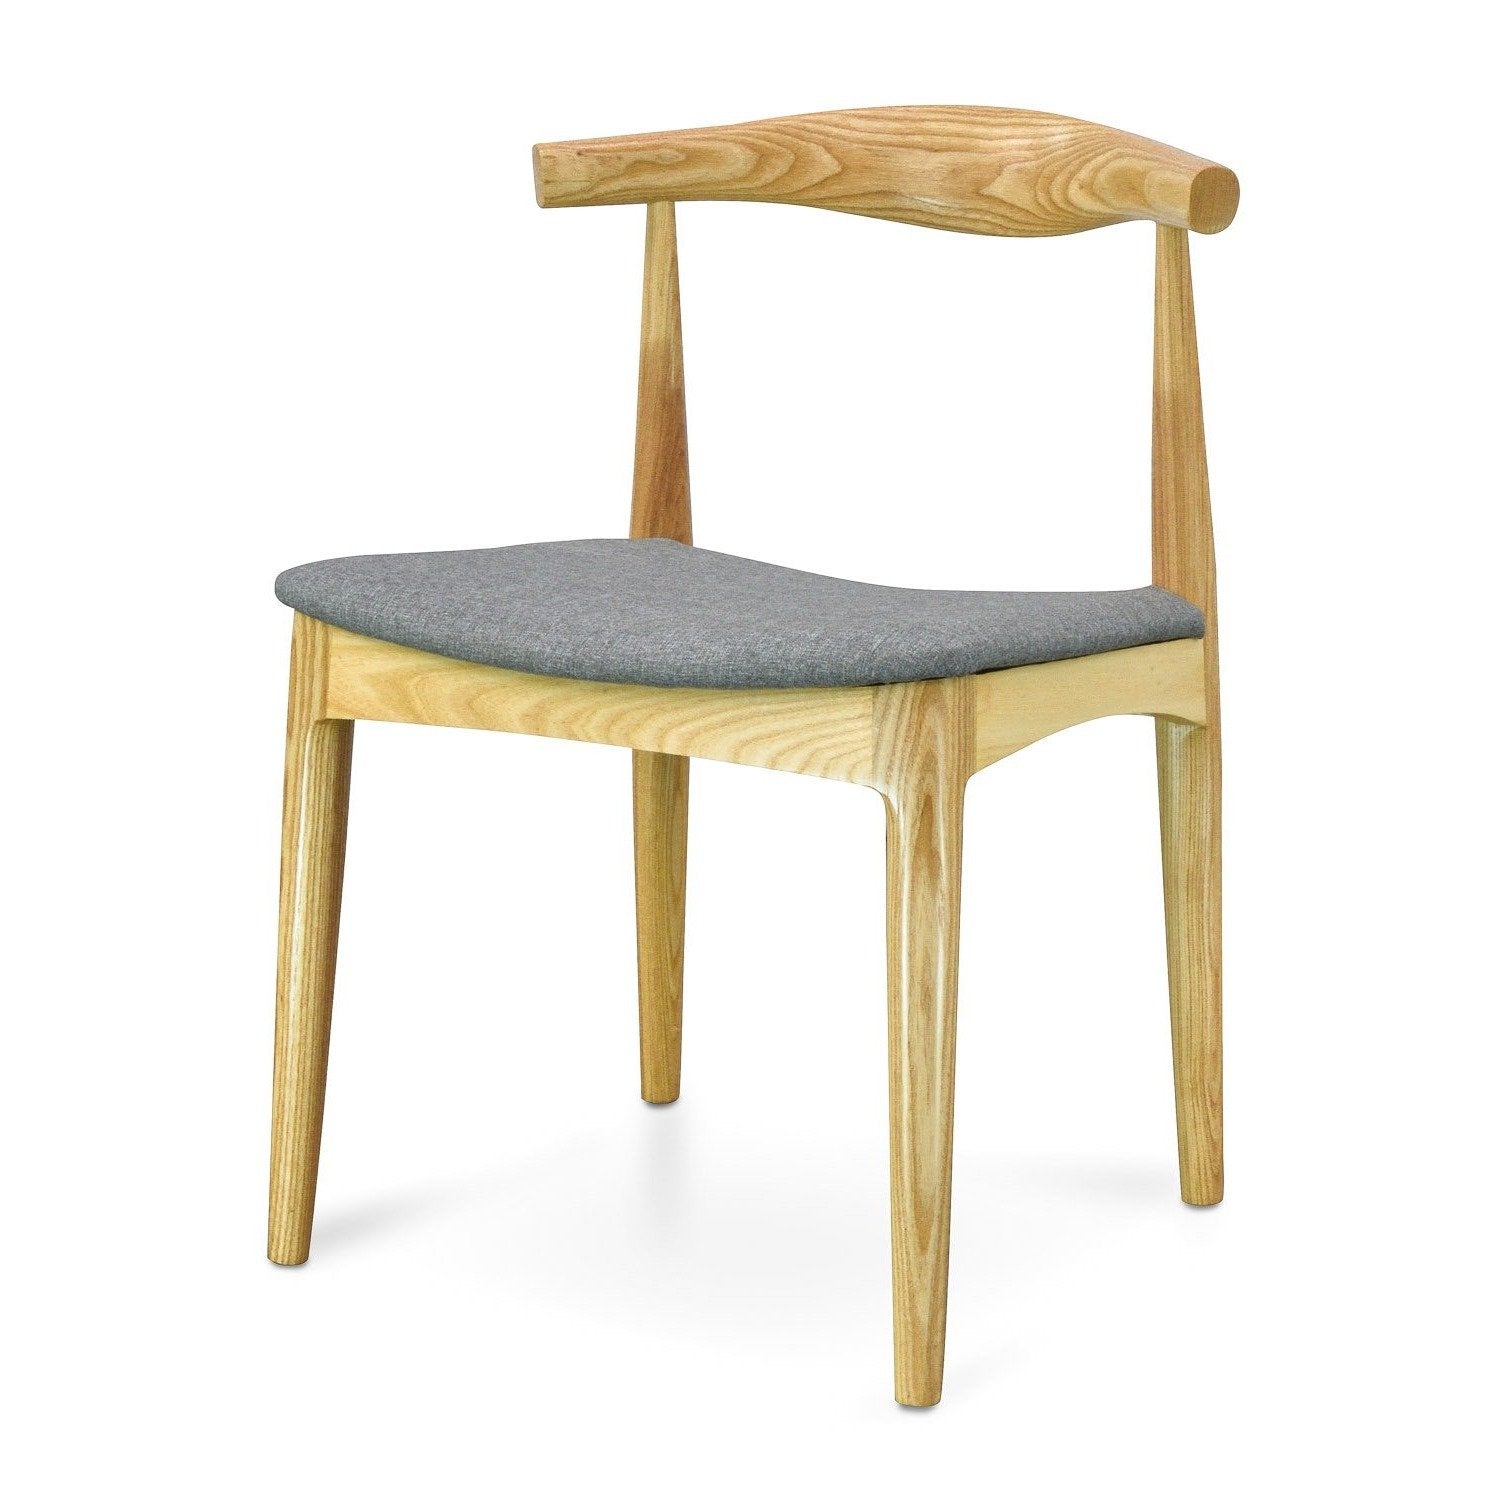 Nora Elbow Dining Chair - Natural with Light Grey Fabric Seat